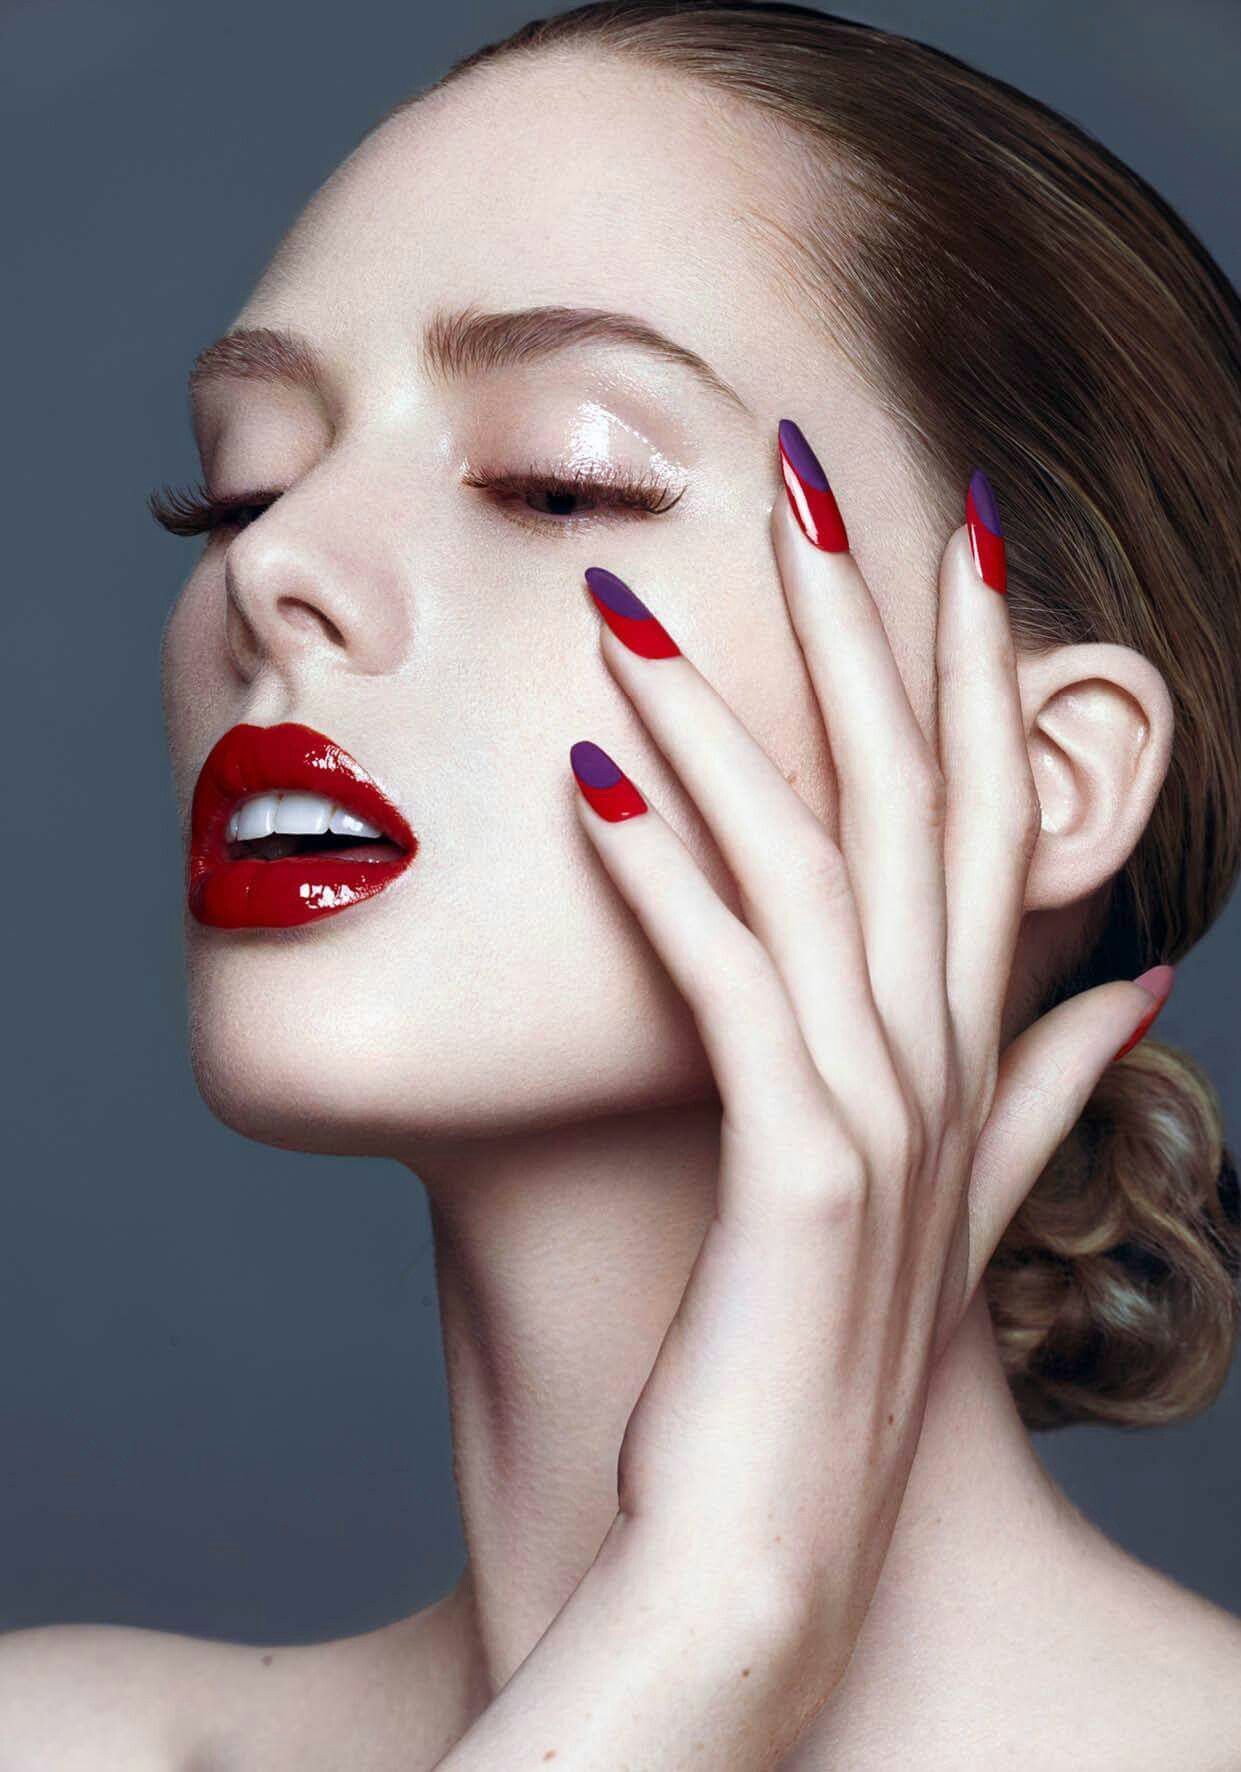 Pin By Chloe Selene On Nails In 2019 Makeup Photography -   14 makeup Photography poses ideas